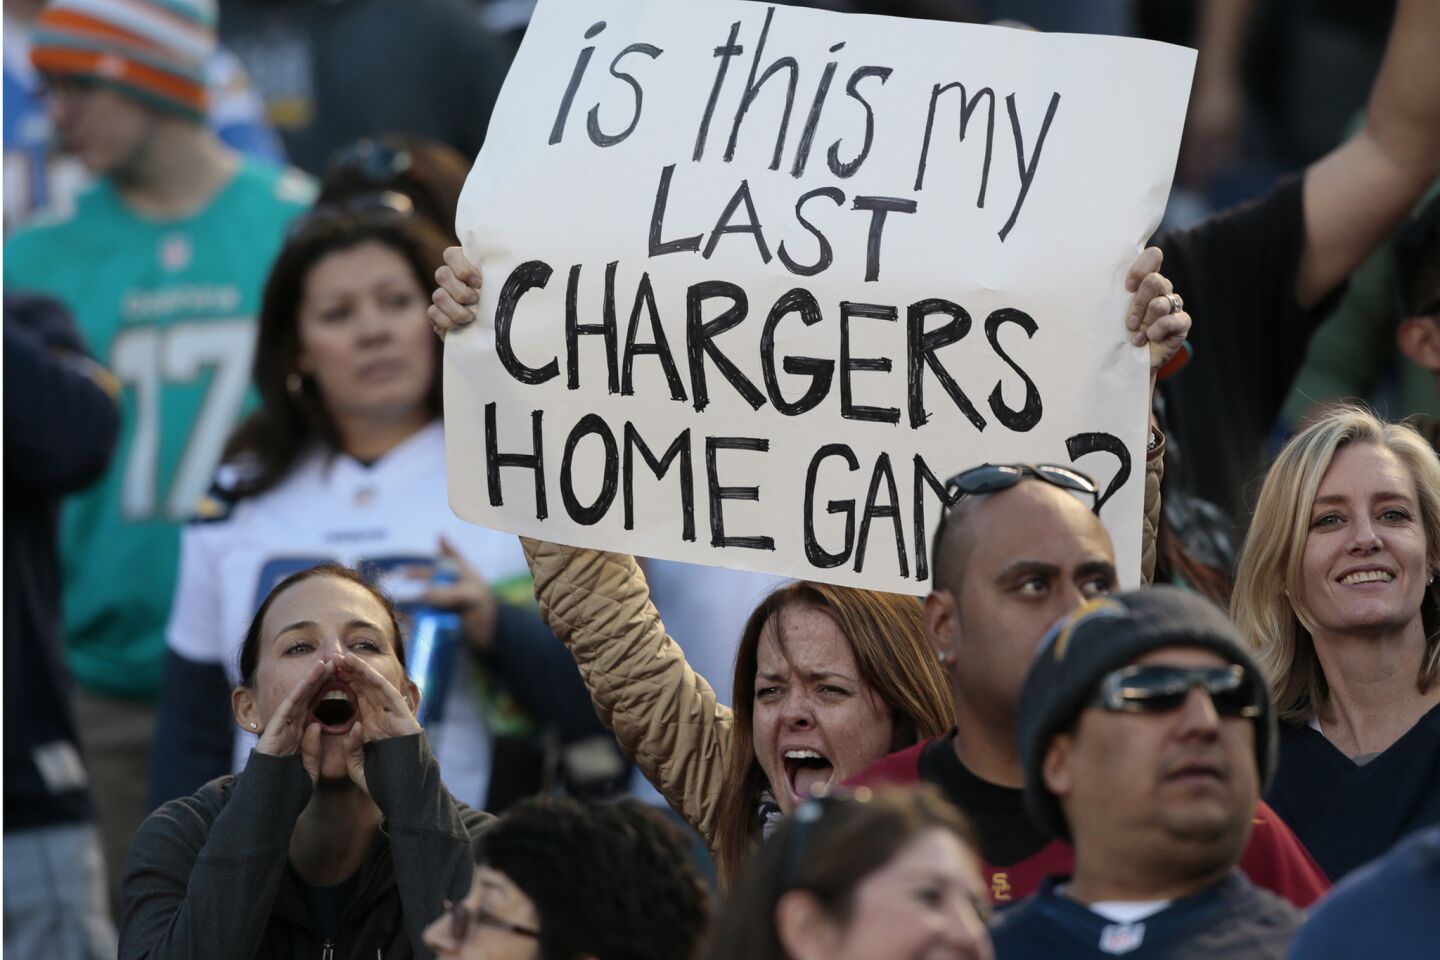 Michelle Gable from Cardiff cheers from her field-level seats Sunday during what could be the Chargers' final game in San Diego.